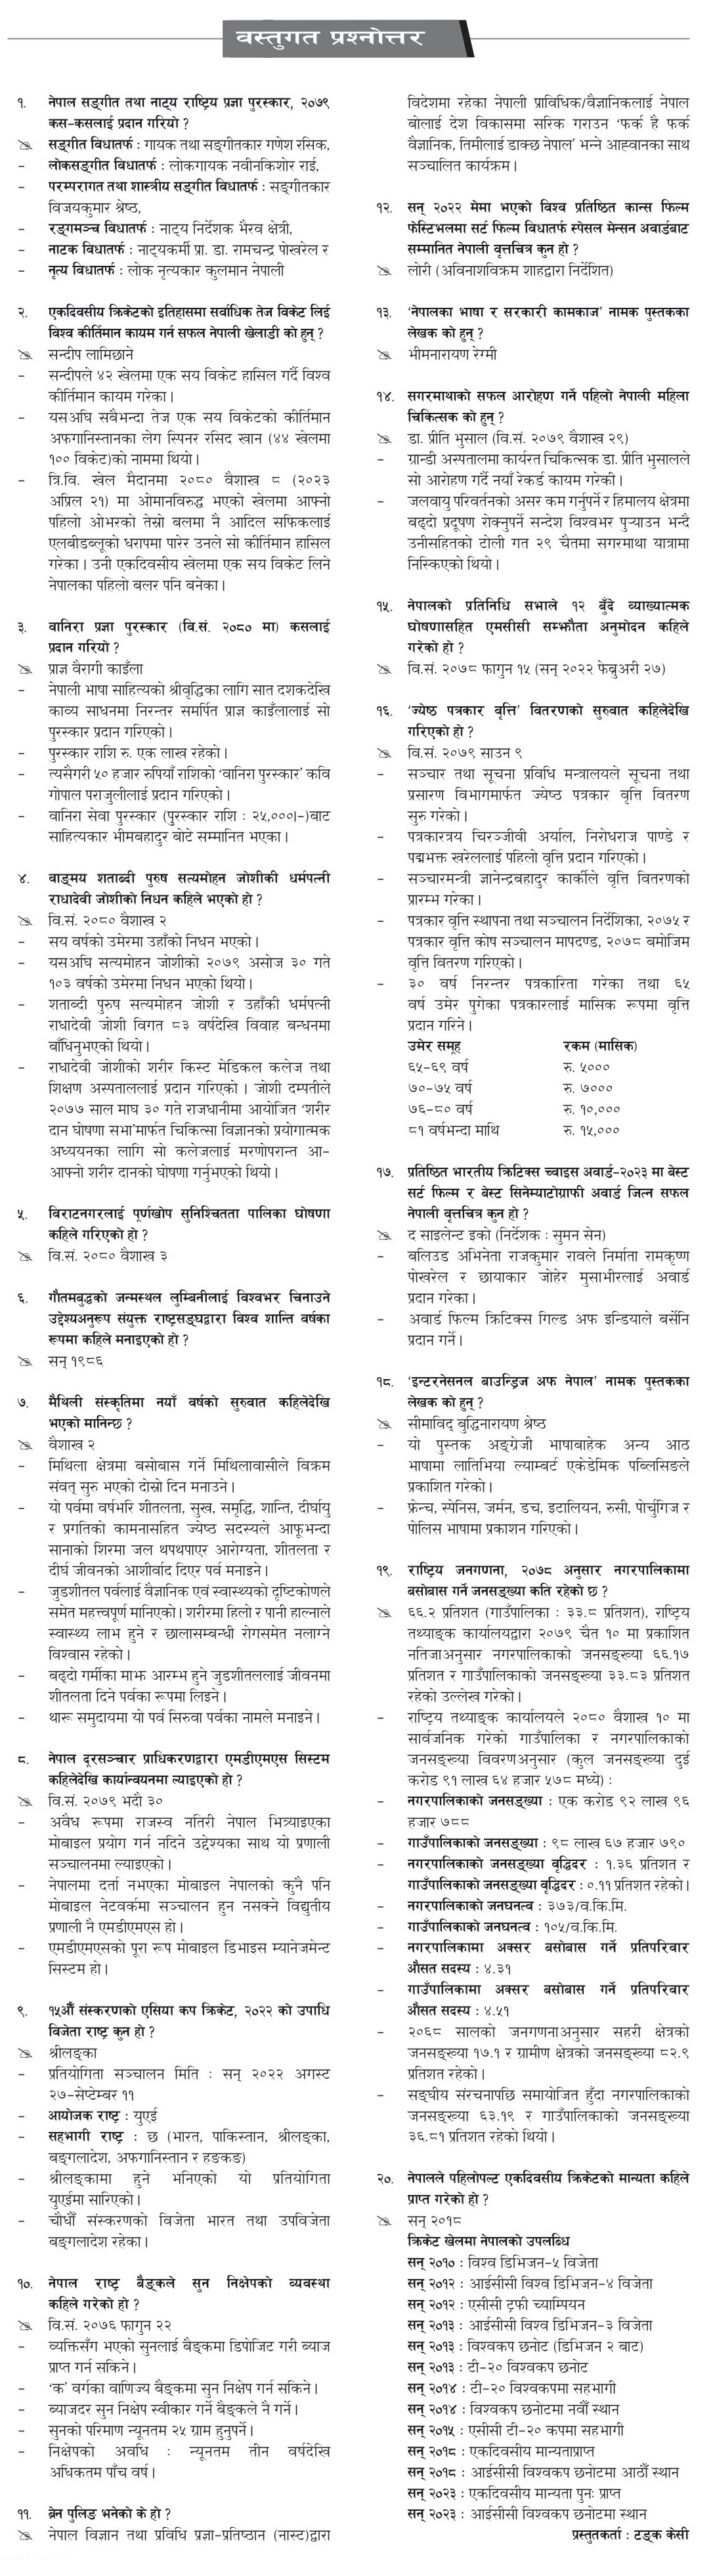 Gorkhapatra Material Objective Question Answer published in 2080 Baishak 13